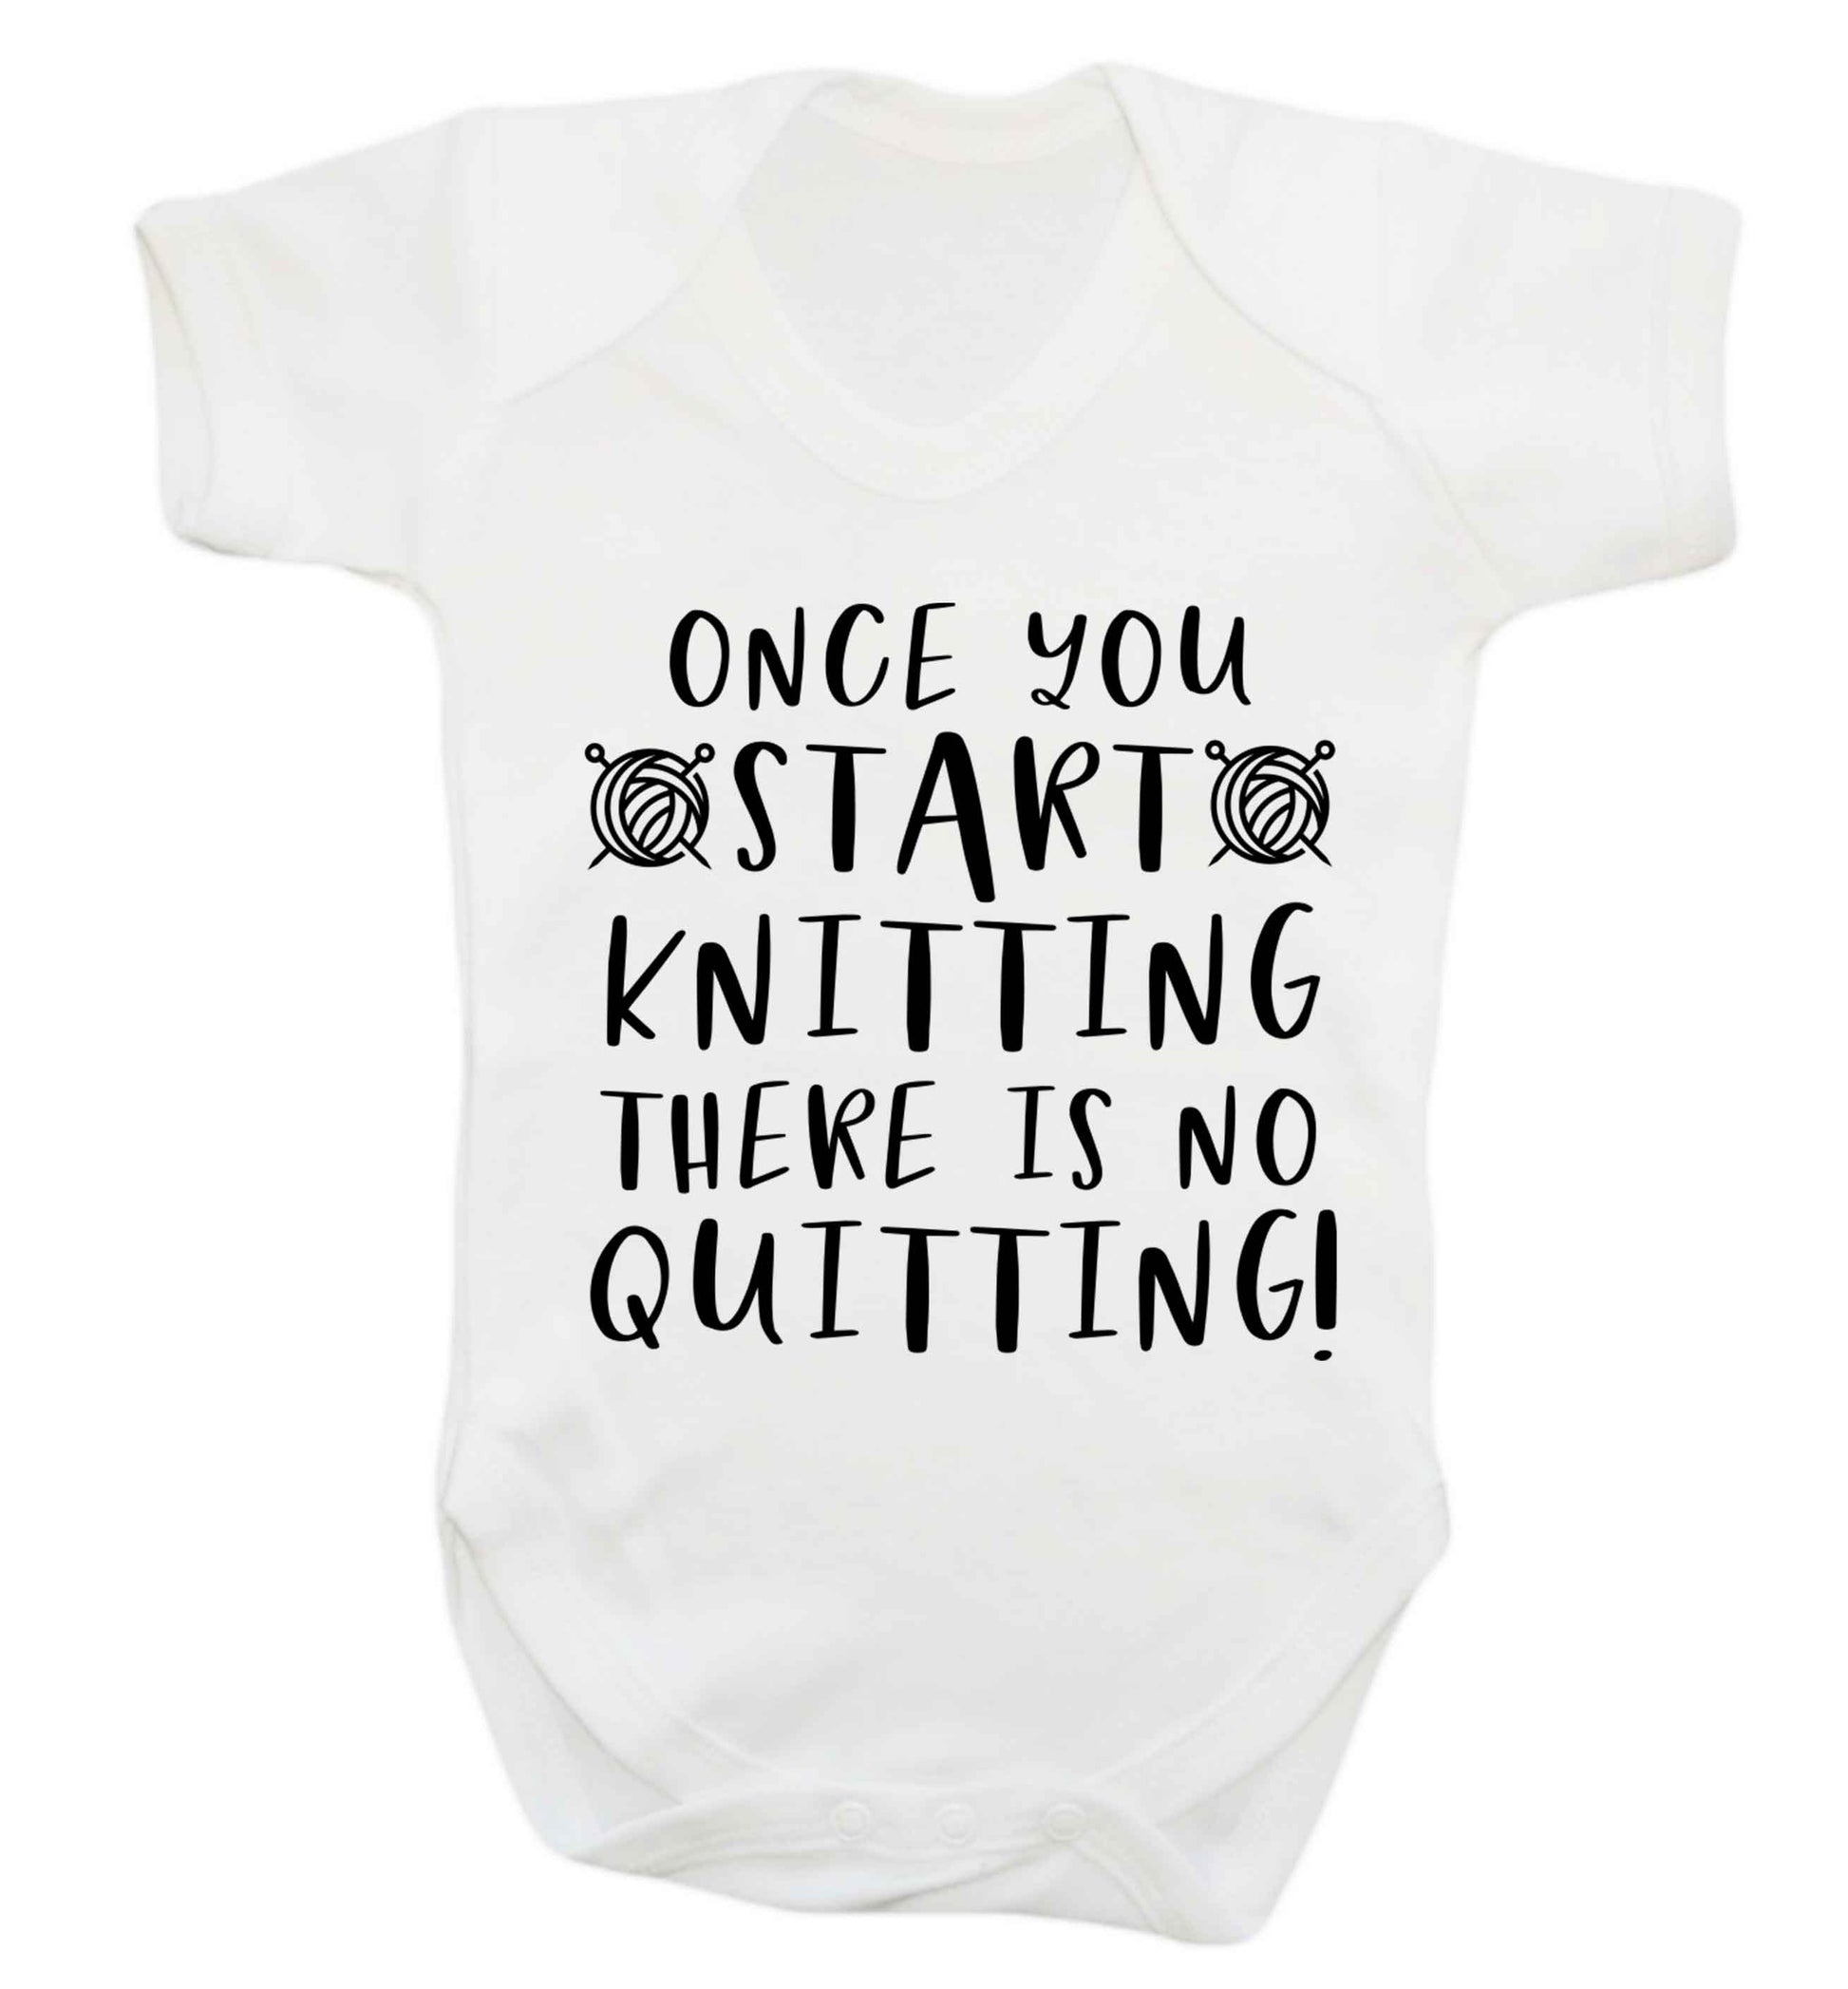 Once you start knitting there is no quitting! Baby Vest white 18-24 months